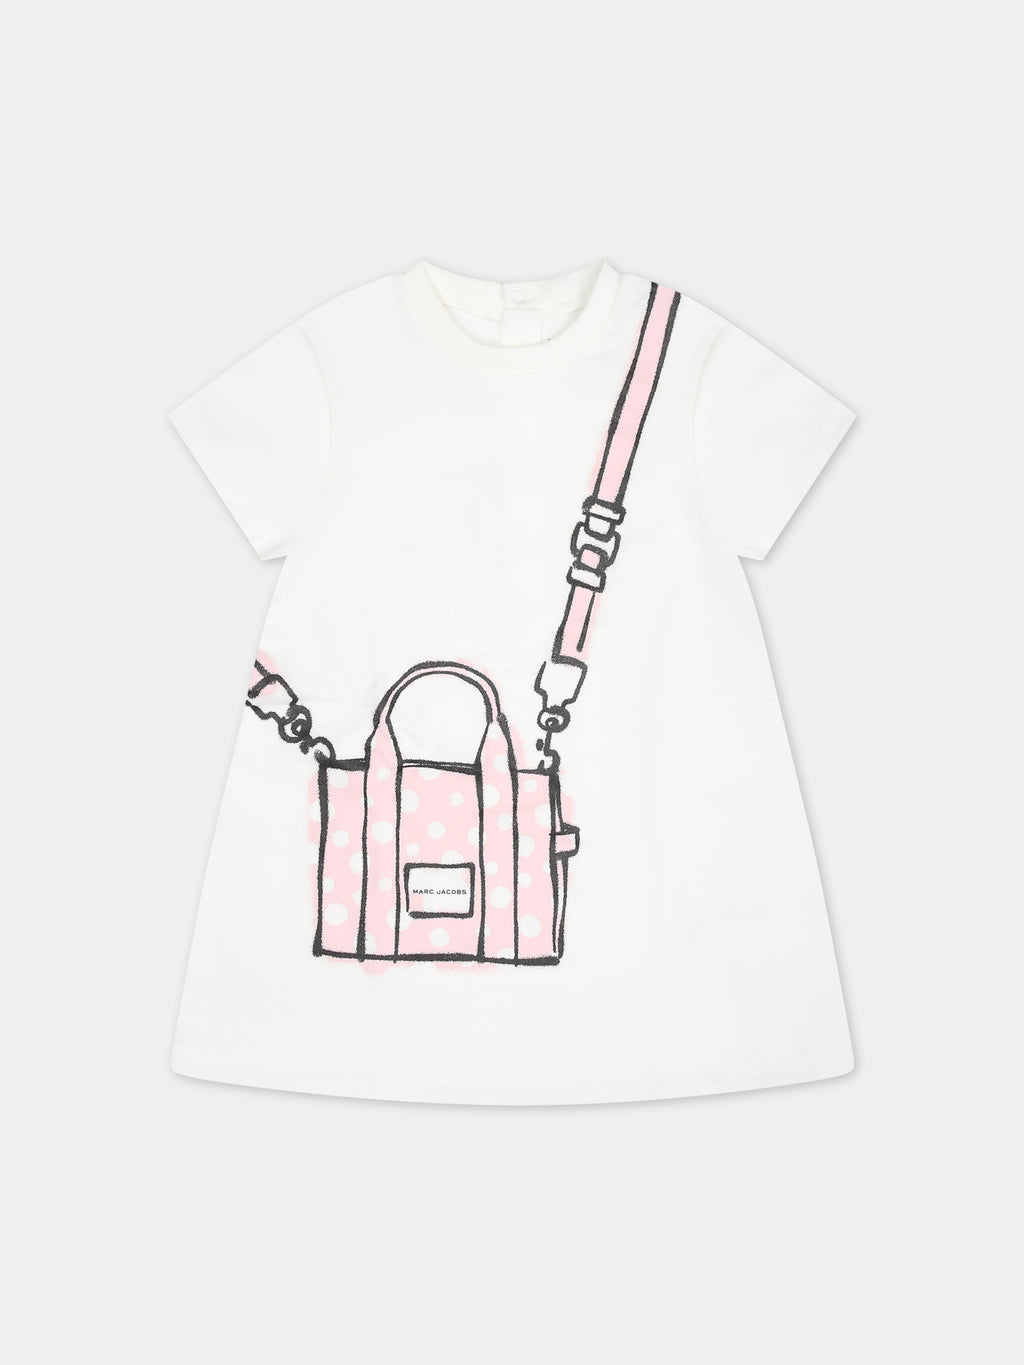 White dress for baby girl with iconic bag